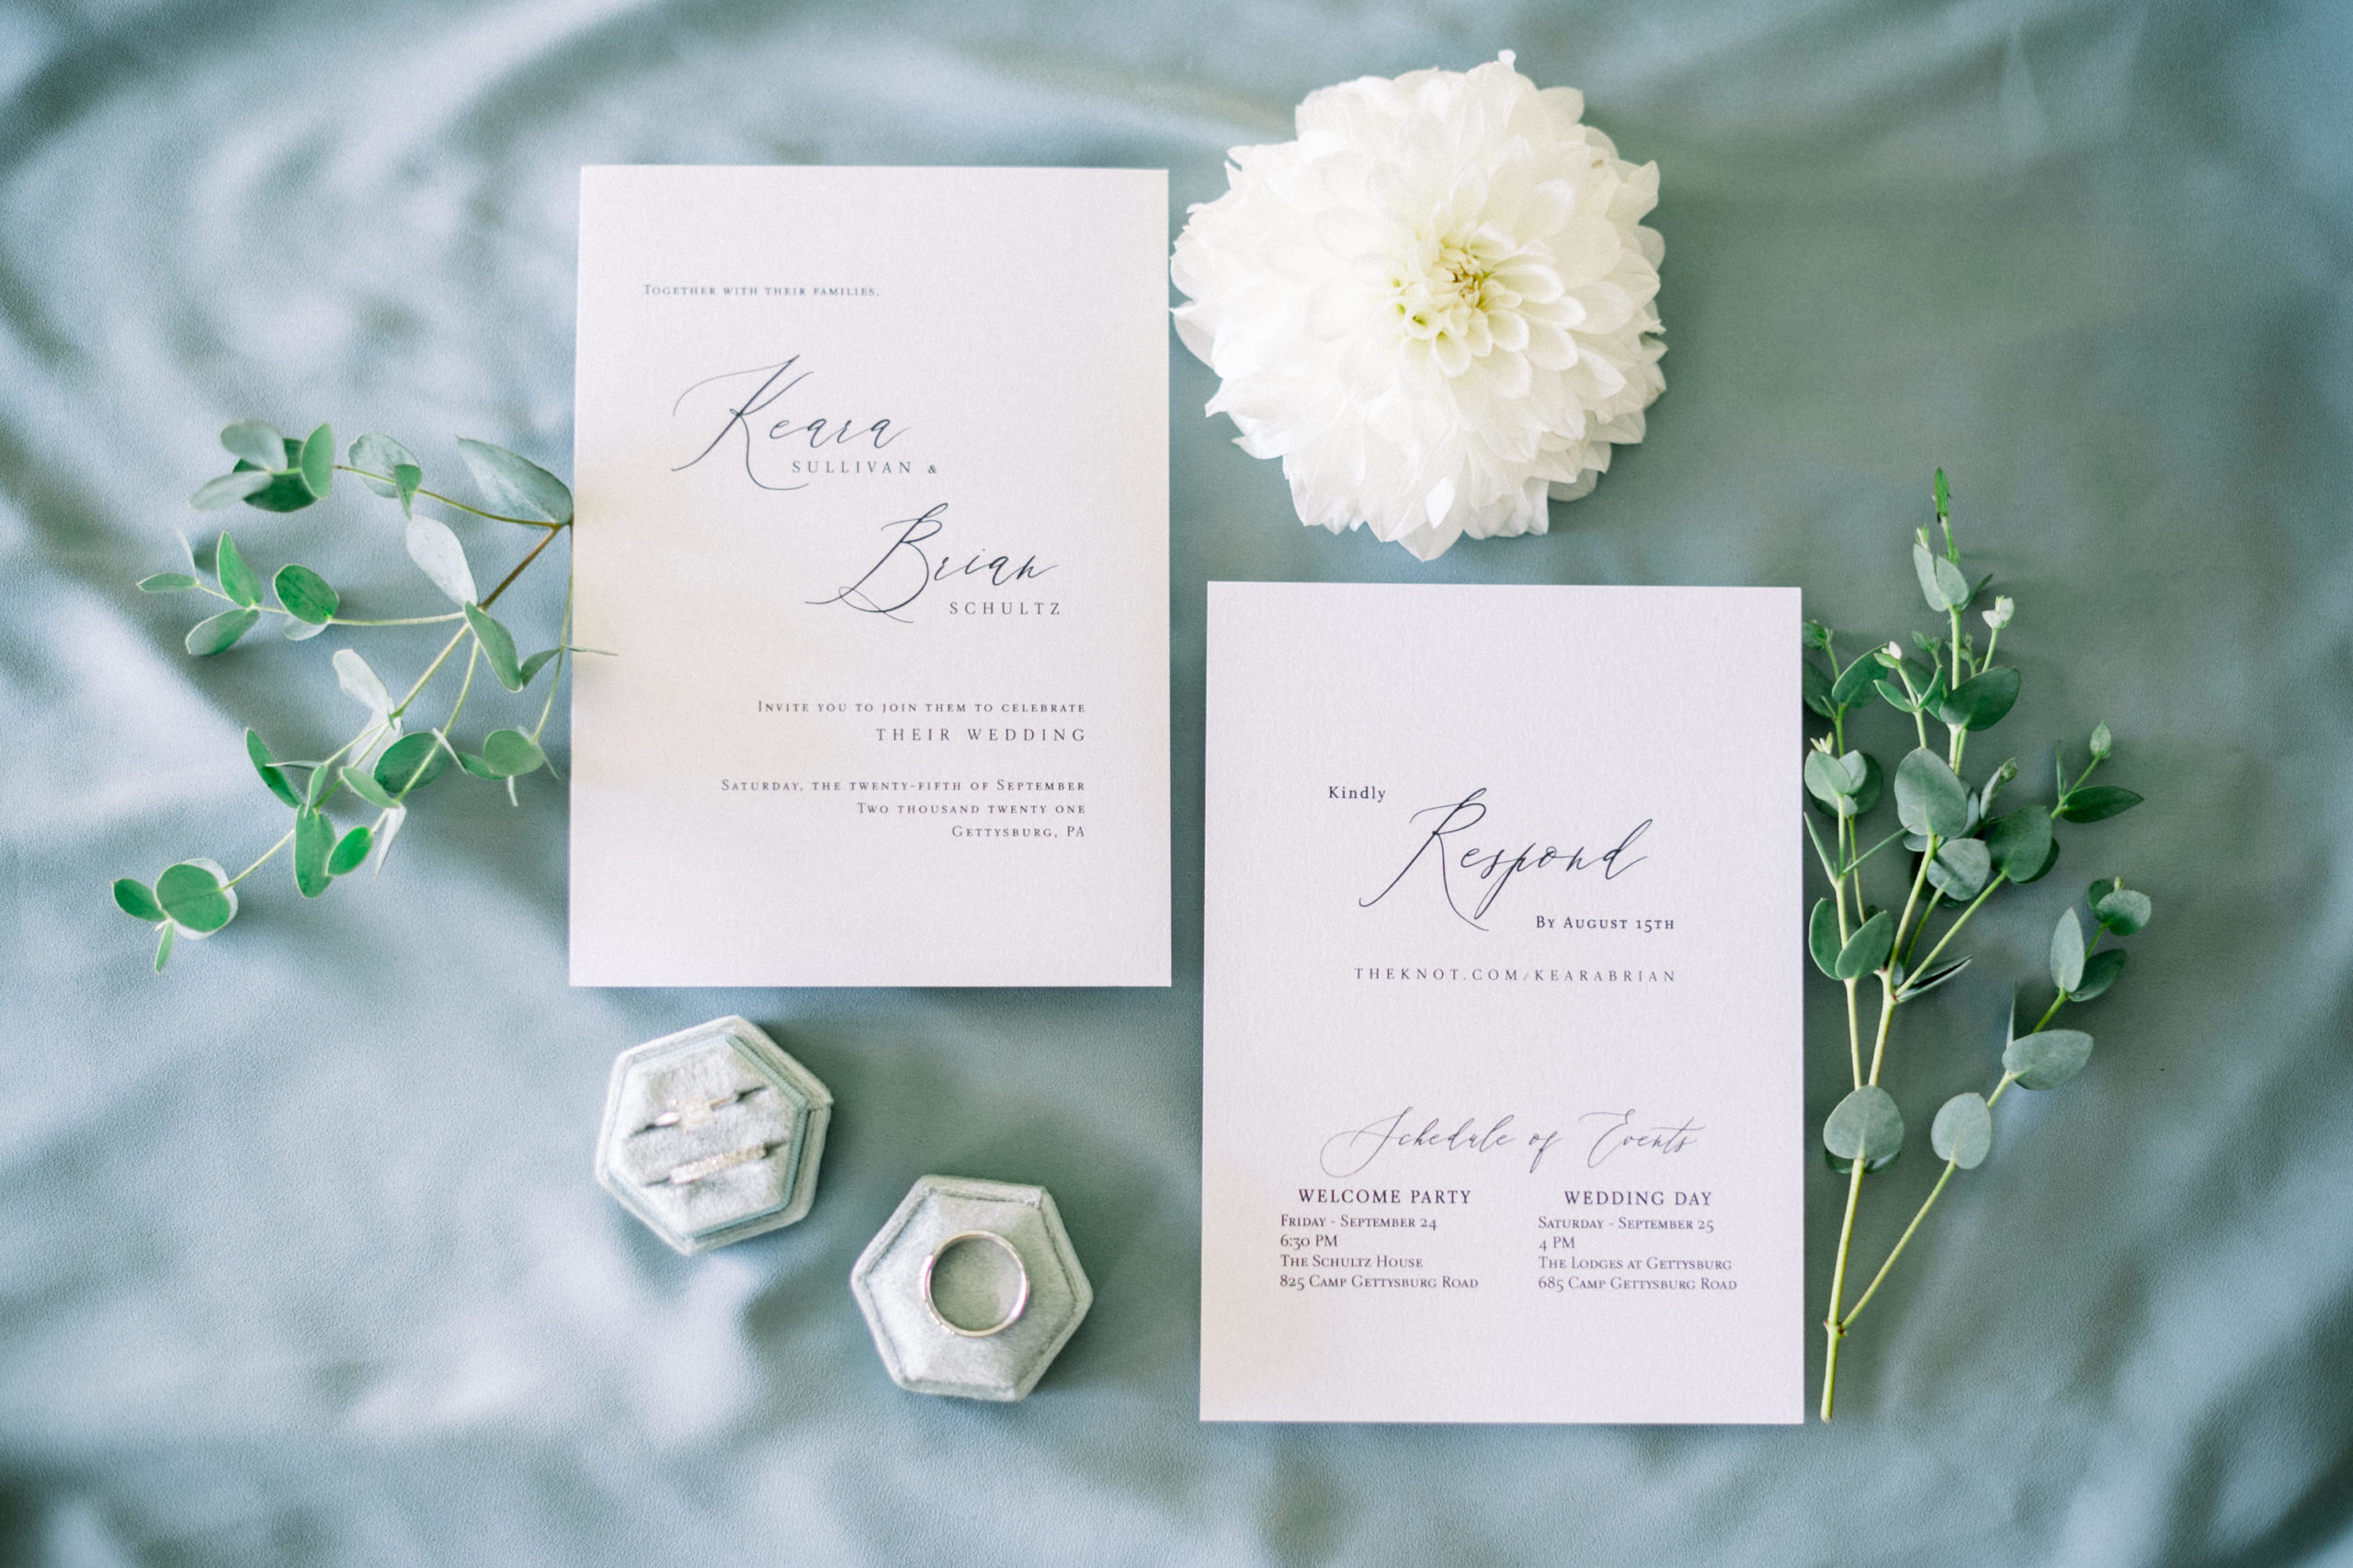 flatlay of wedding invitations and florals and wedding rings on a light blue fabric